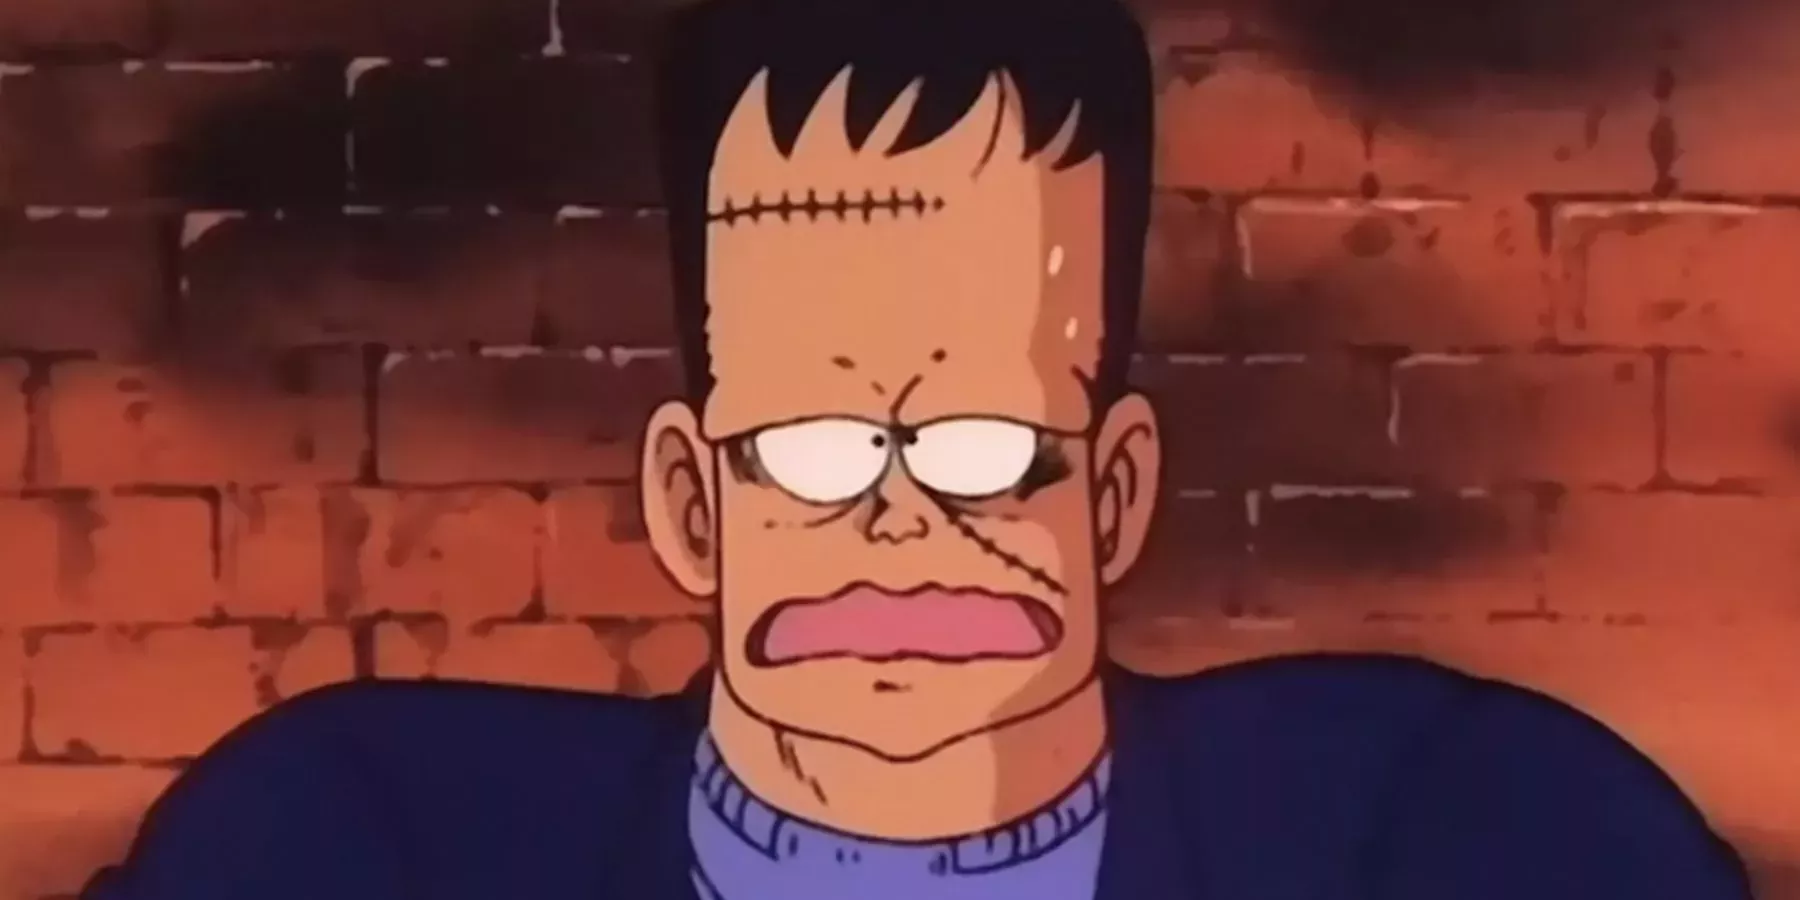 Android 8 with a worried and confused expression on his face in Dragon Ball.